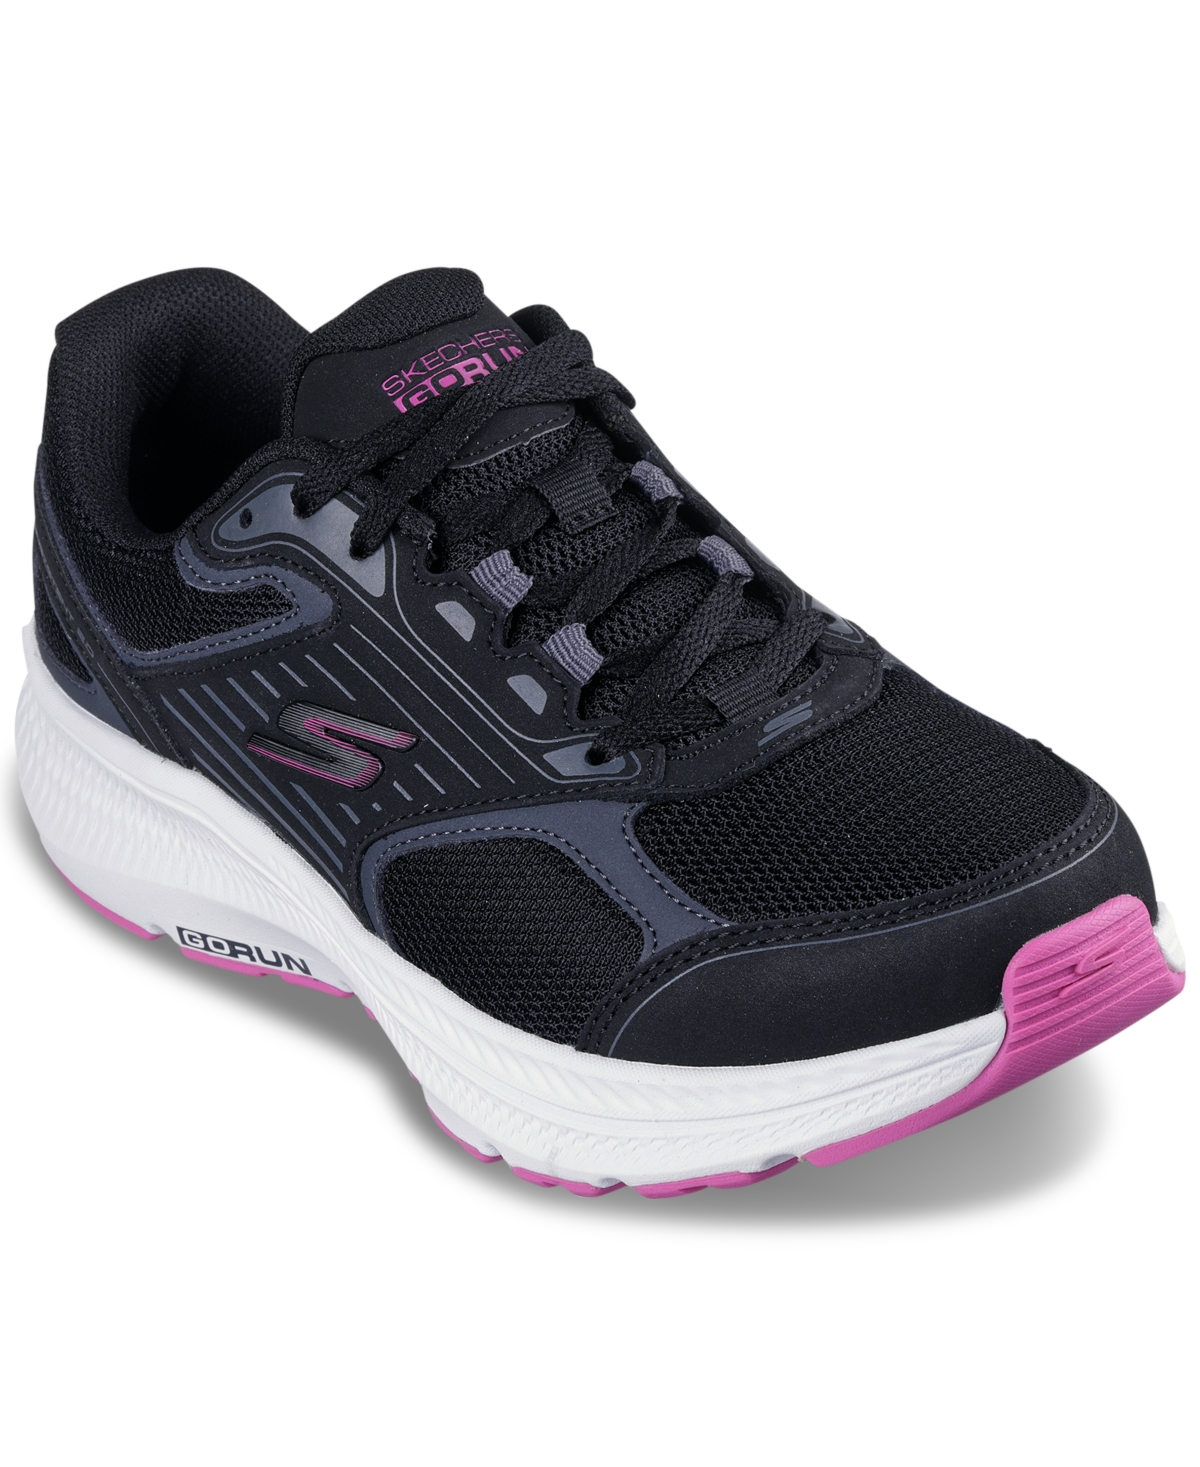 Women's Go Run Consistent 2.0 - Advantage Running Sneakers from Finish Line - Black